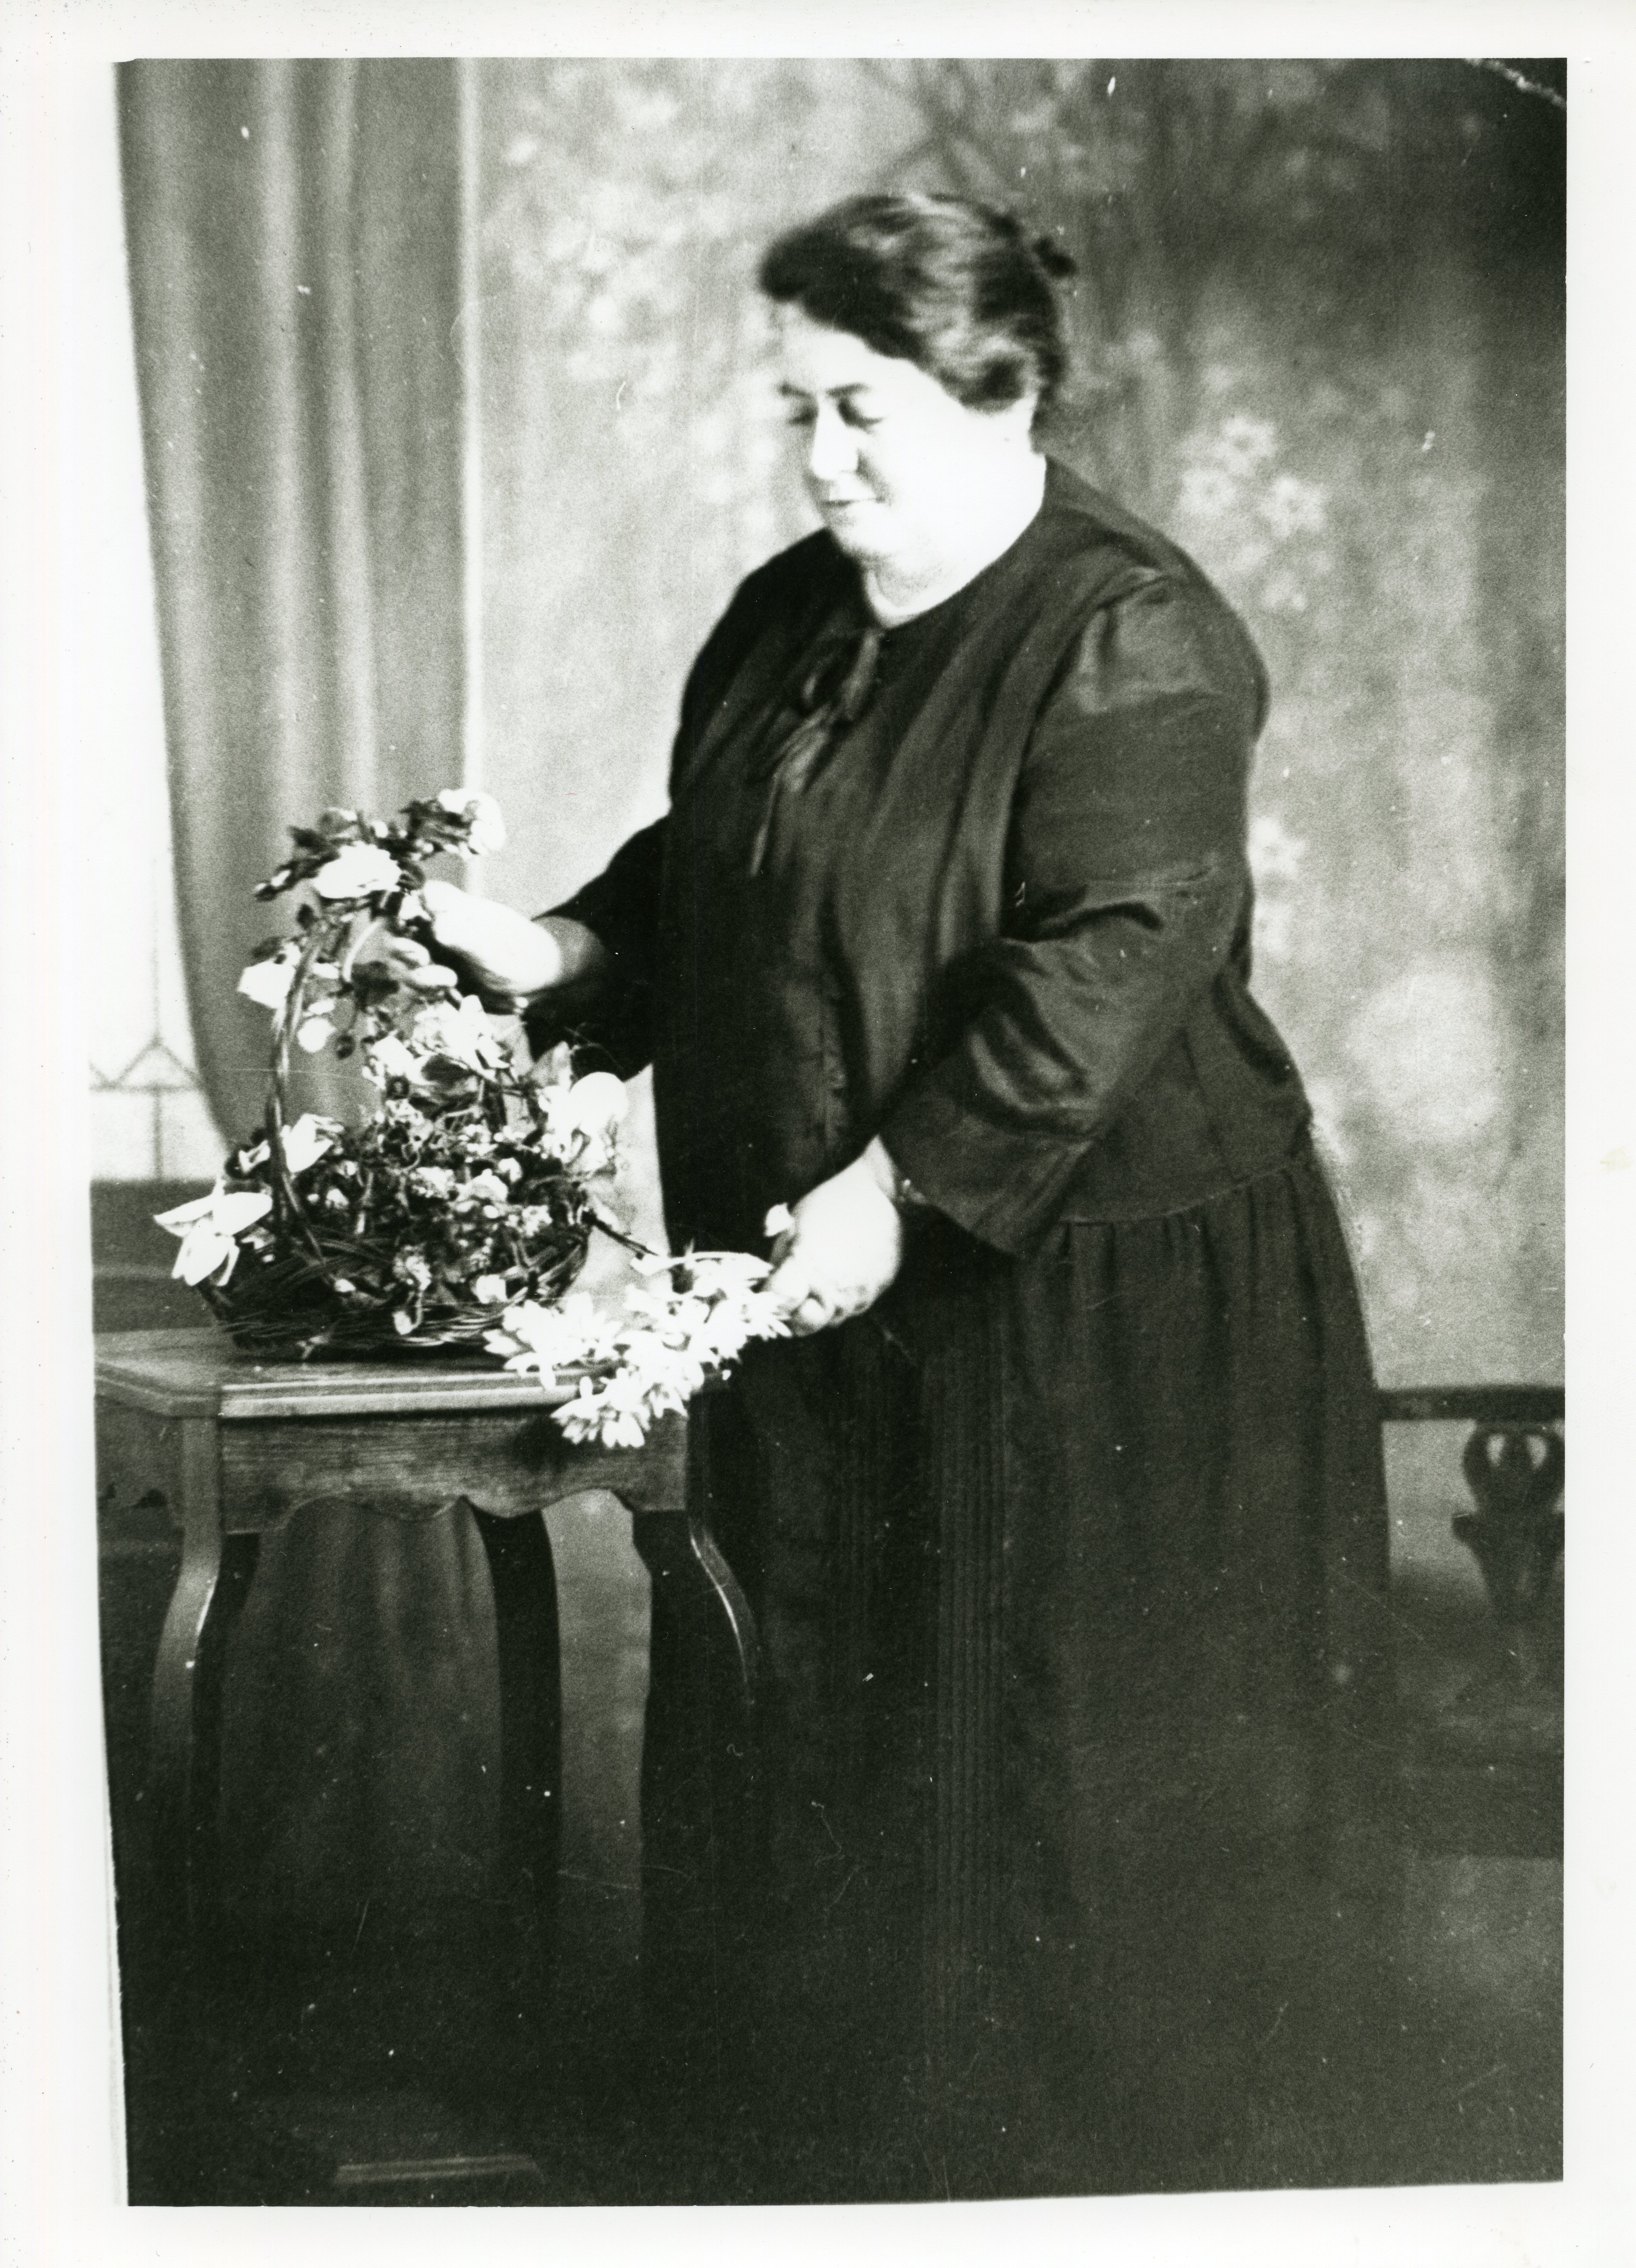 Image 2 of 4 - Black and white photo of a woman arranging flowers on a small wooden side table.